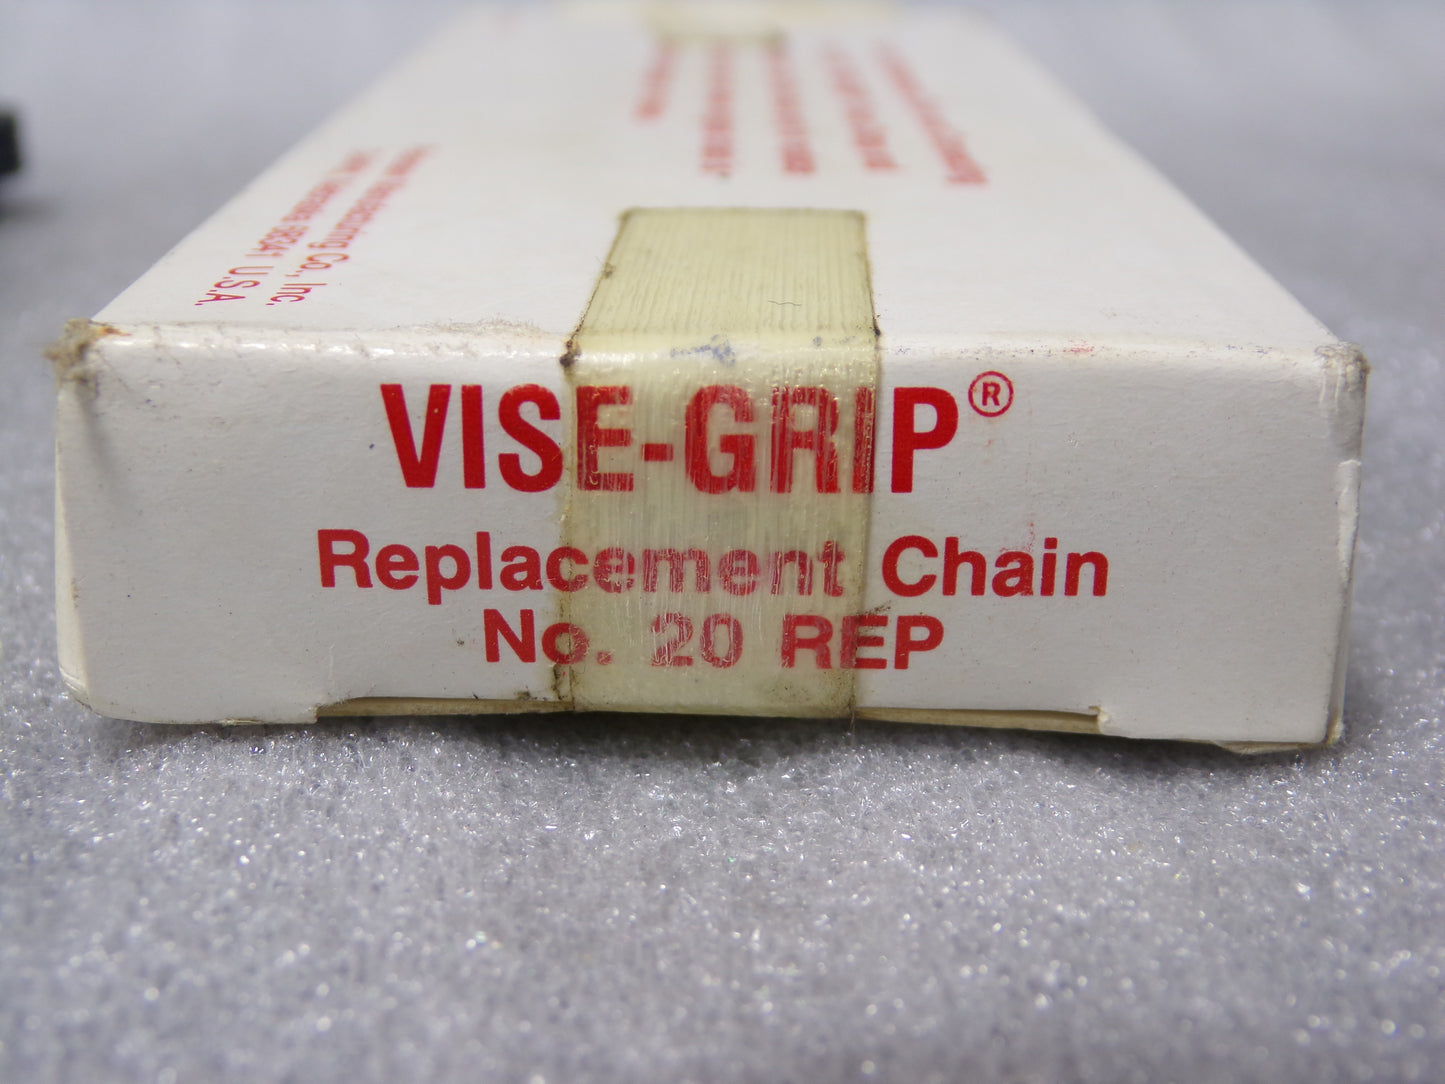 IRWIN VISE-GRIP 18 in Replacement Chain, 20REP (CR00417-BT22)